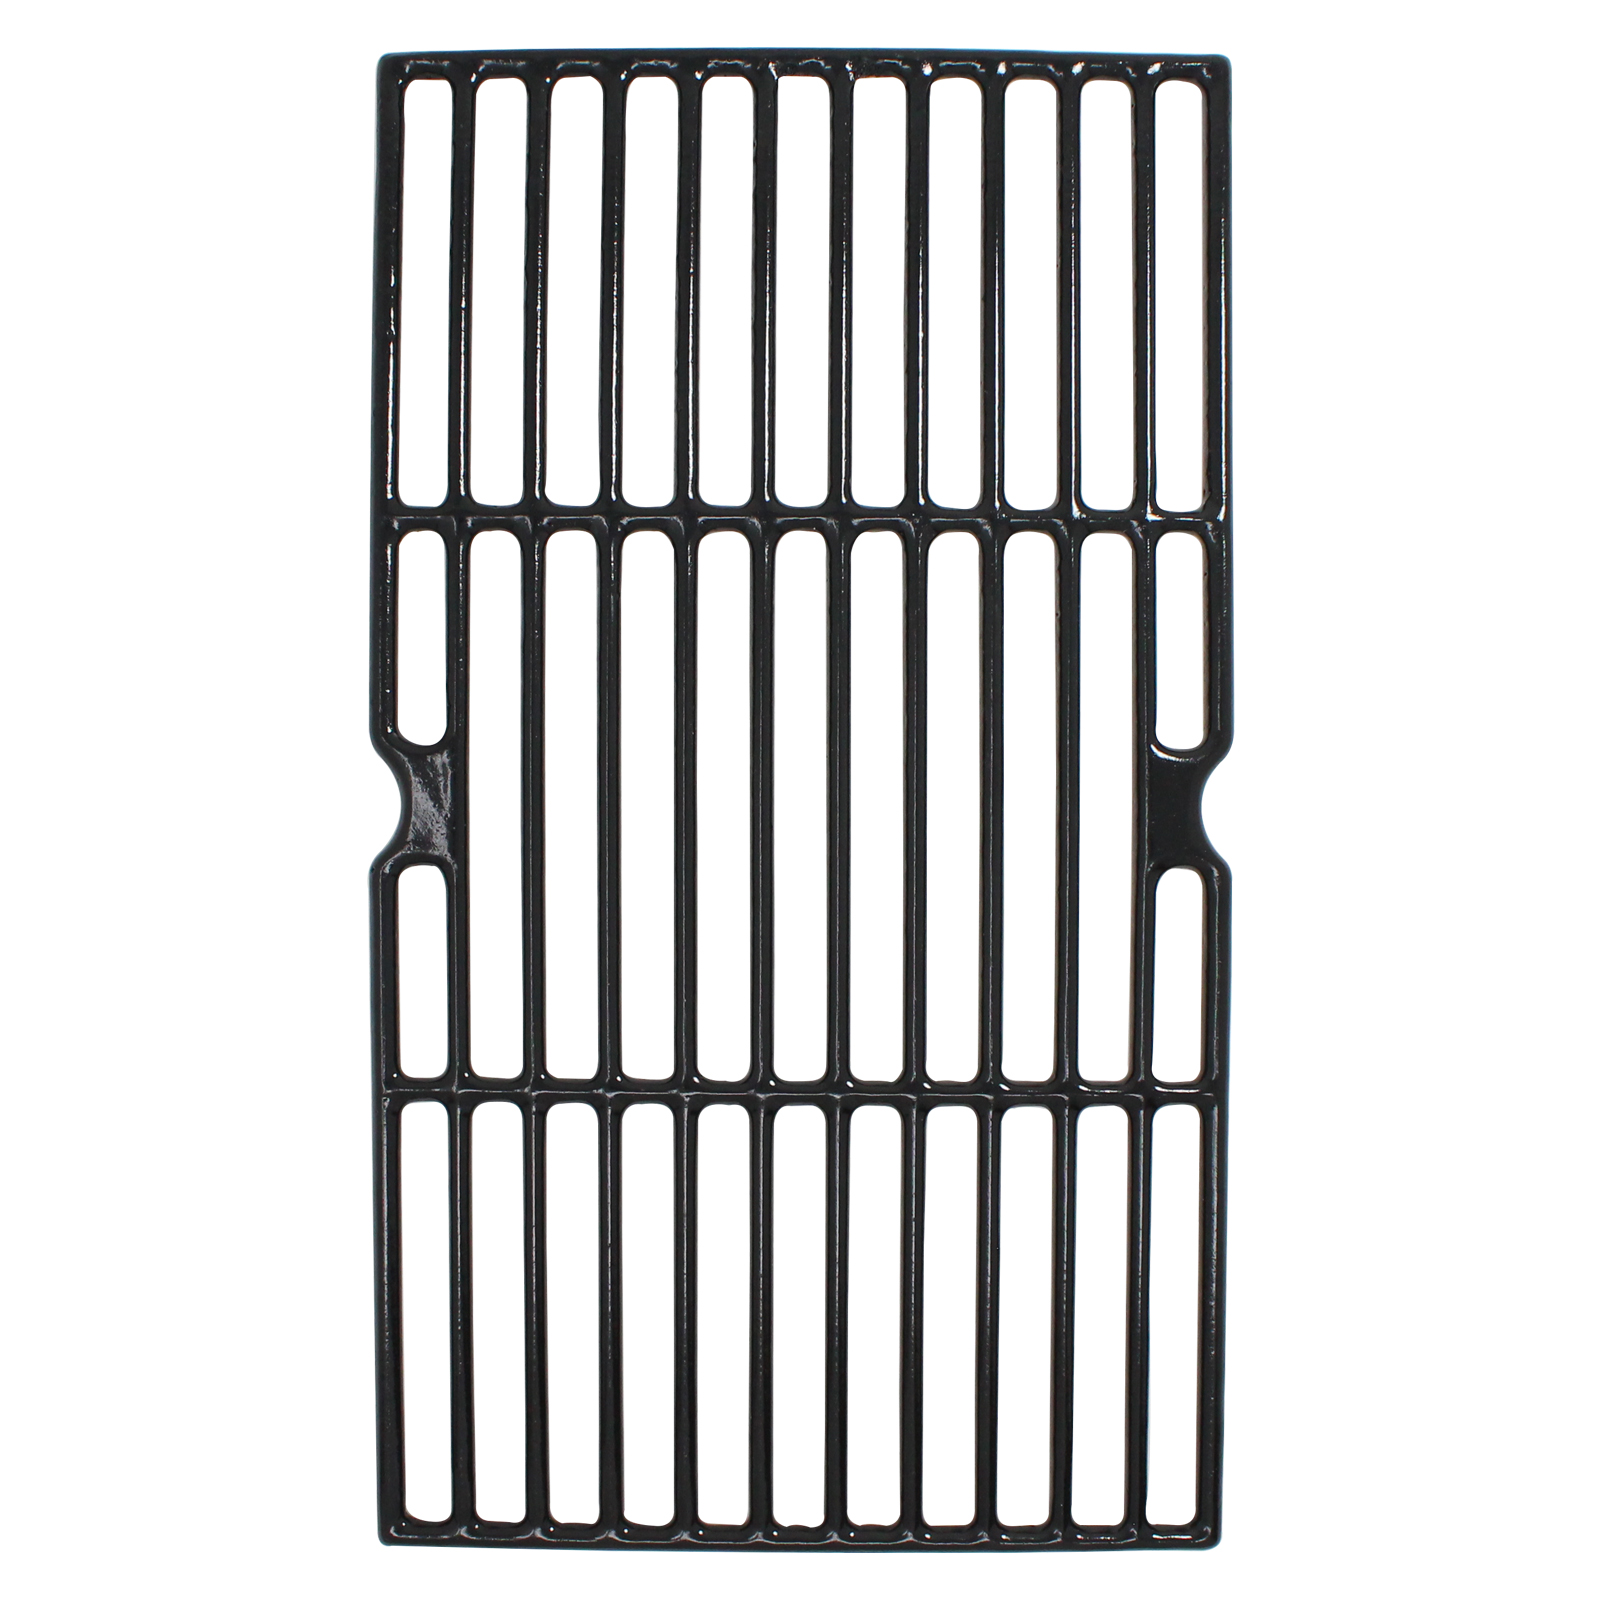 2 Pack BBQ Grill Cooking Grates Replacement for Broil King Sovereign 90, Broil King Sovereign 20, Broil King Sovereign 70, Charbroil 463251605, Charbroil 463251713, 463240904 - Cast Iron Grid 16 3/4" - image 4 of 4